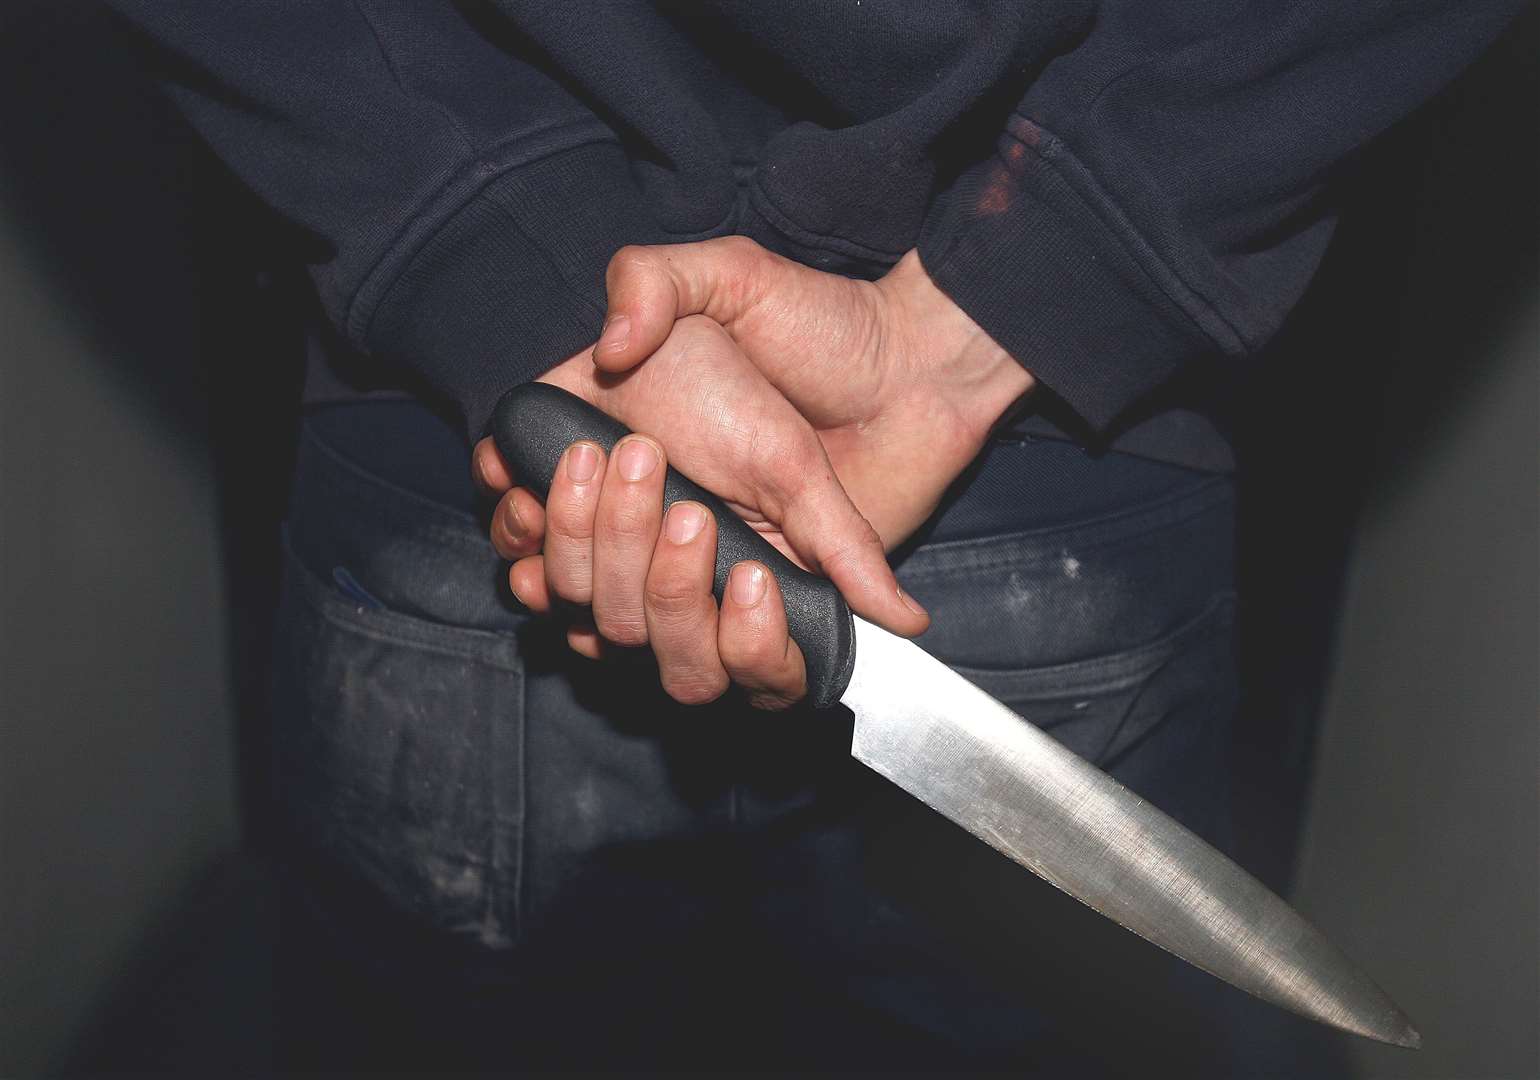 Knife crime awareness programme 'Mind the Knife' has been trialled in 12 Kent schools